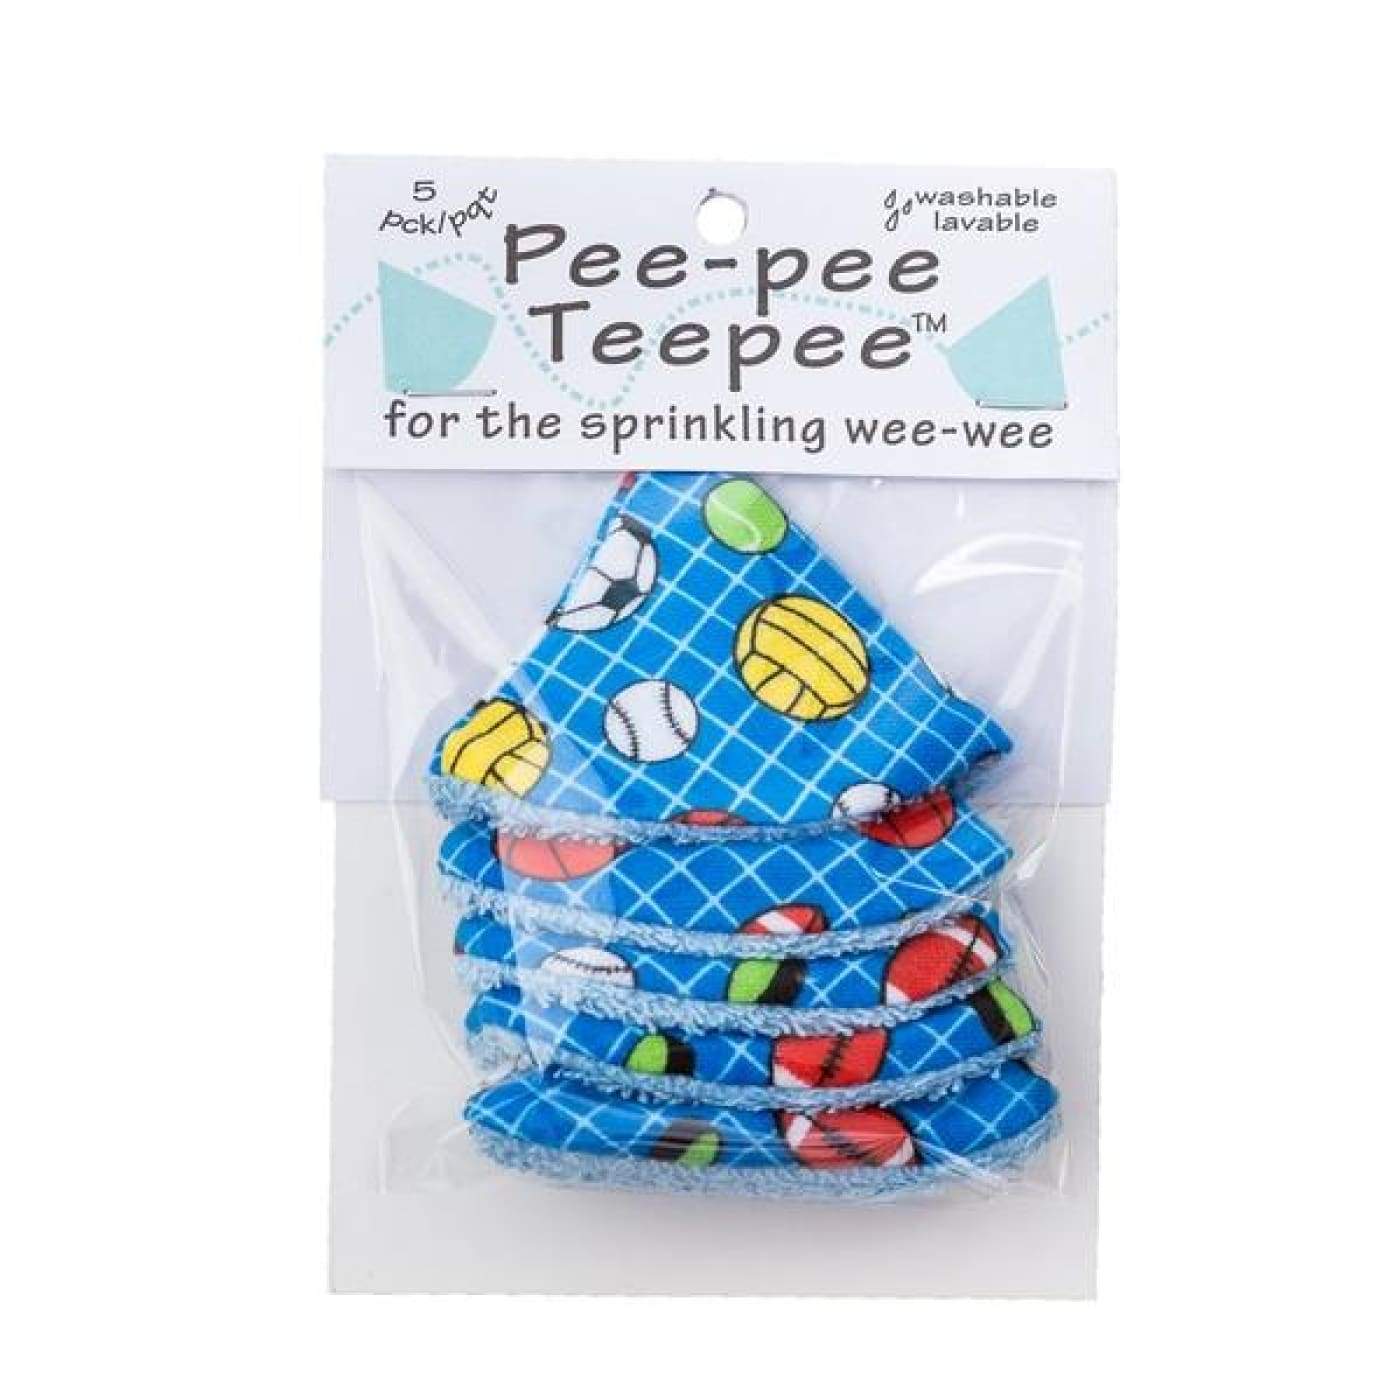 Pee-pee Teepees - Sports Balls - BATHTIME & CHANGING - NAPPIES/WIPES/ACCESSORIES